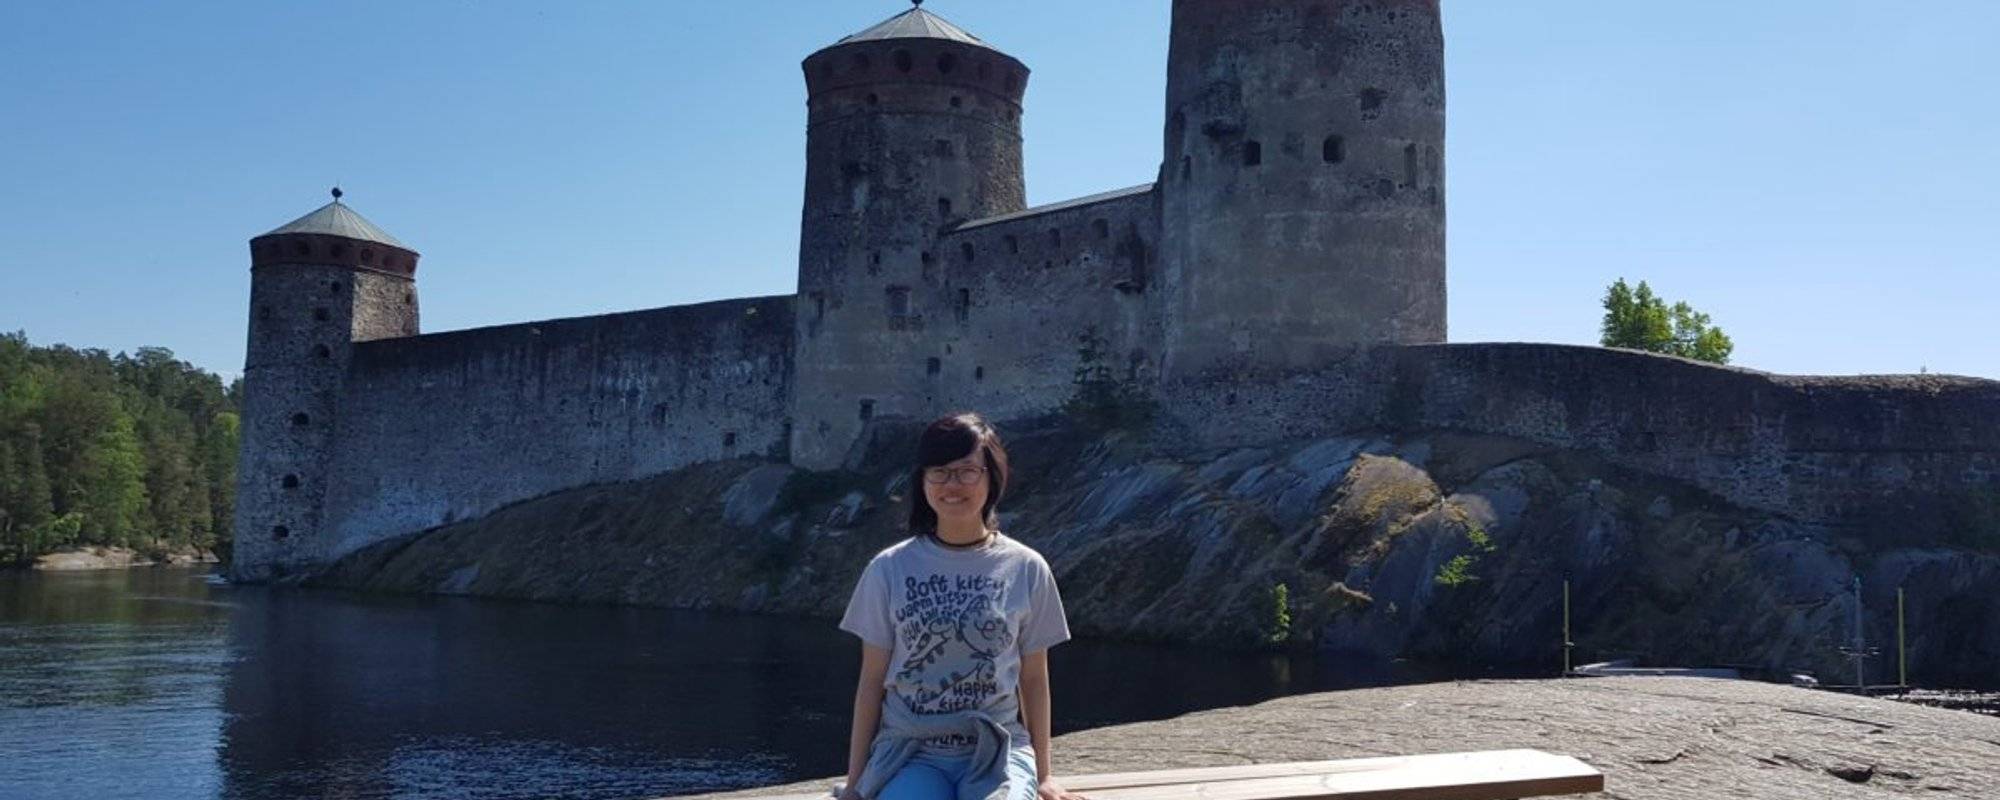 TacoCat’s Travels (Finland) #25: Loafing around St Olaf's Castle! 🏰